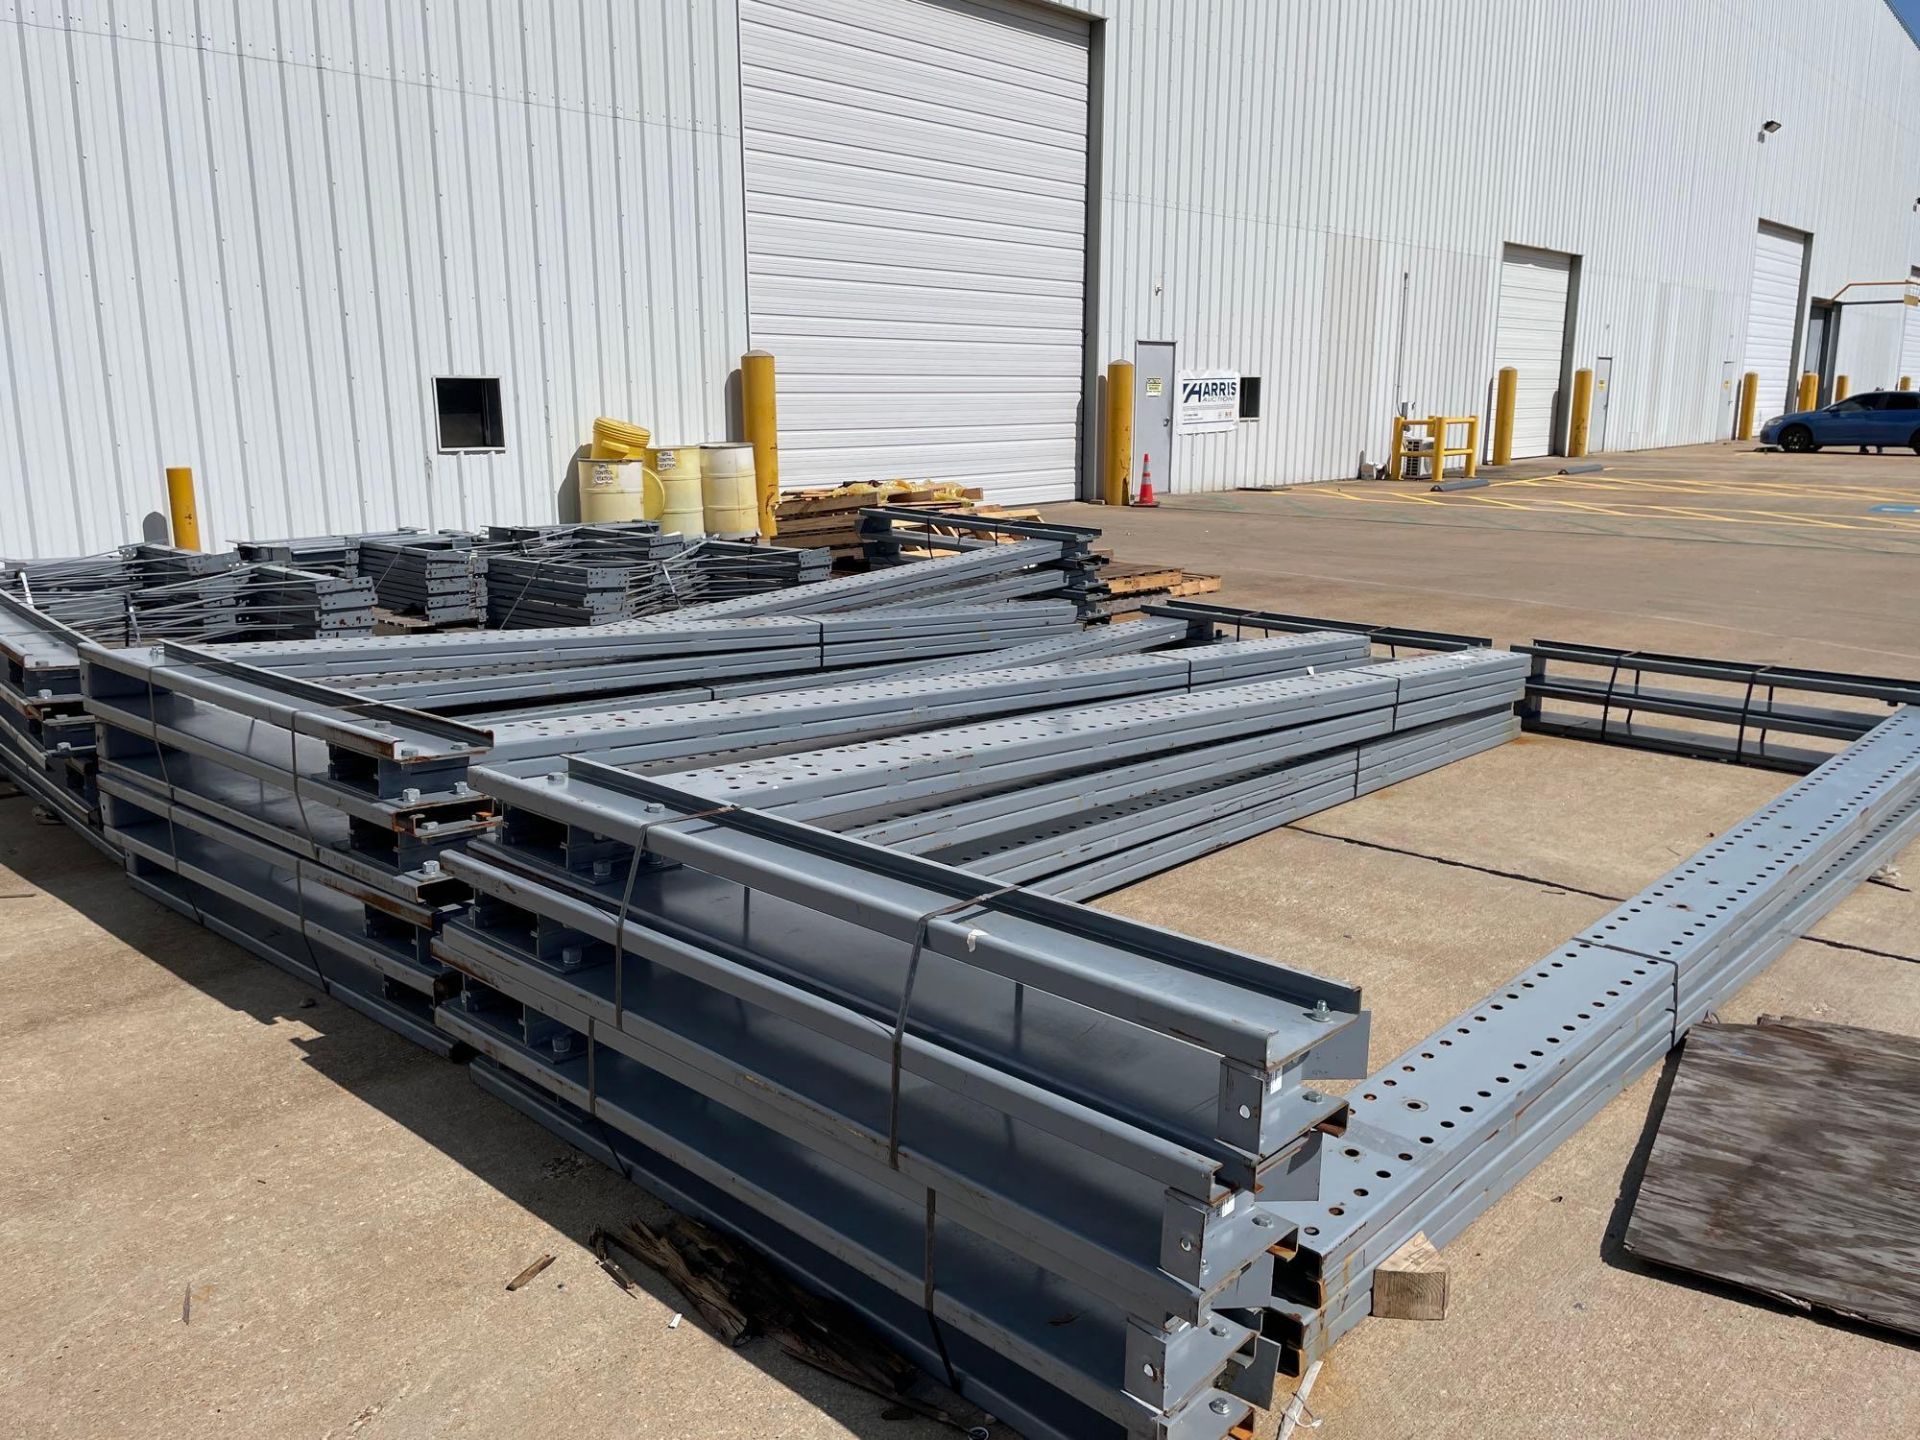 Merco Heavy Duty Pallet Racking (Disassembled) - Image 3 of 8